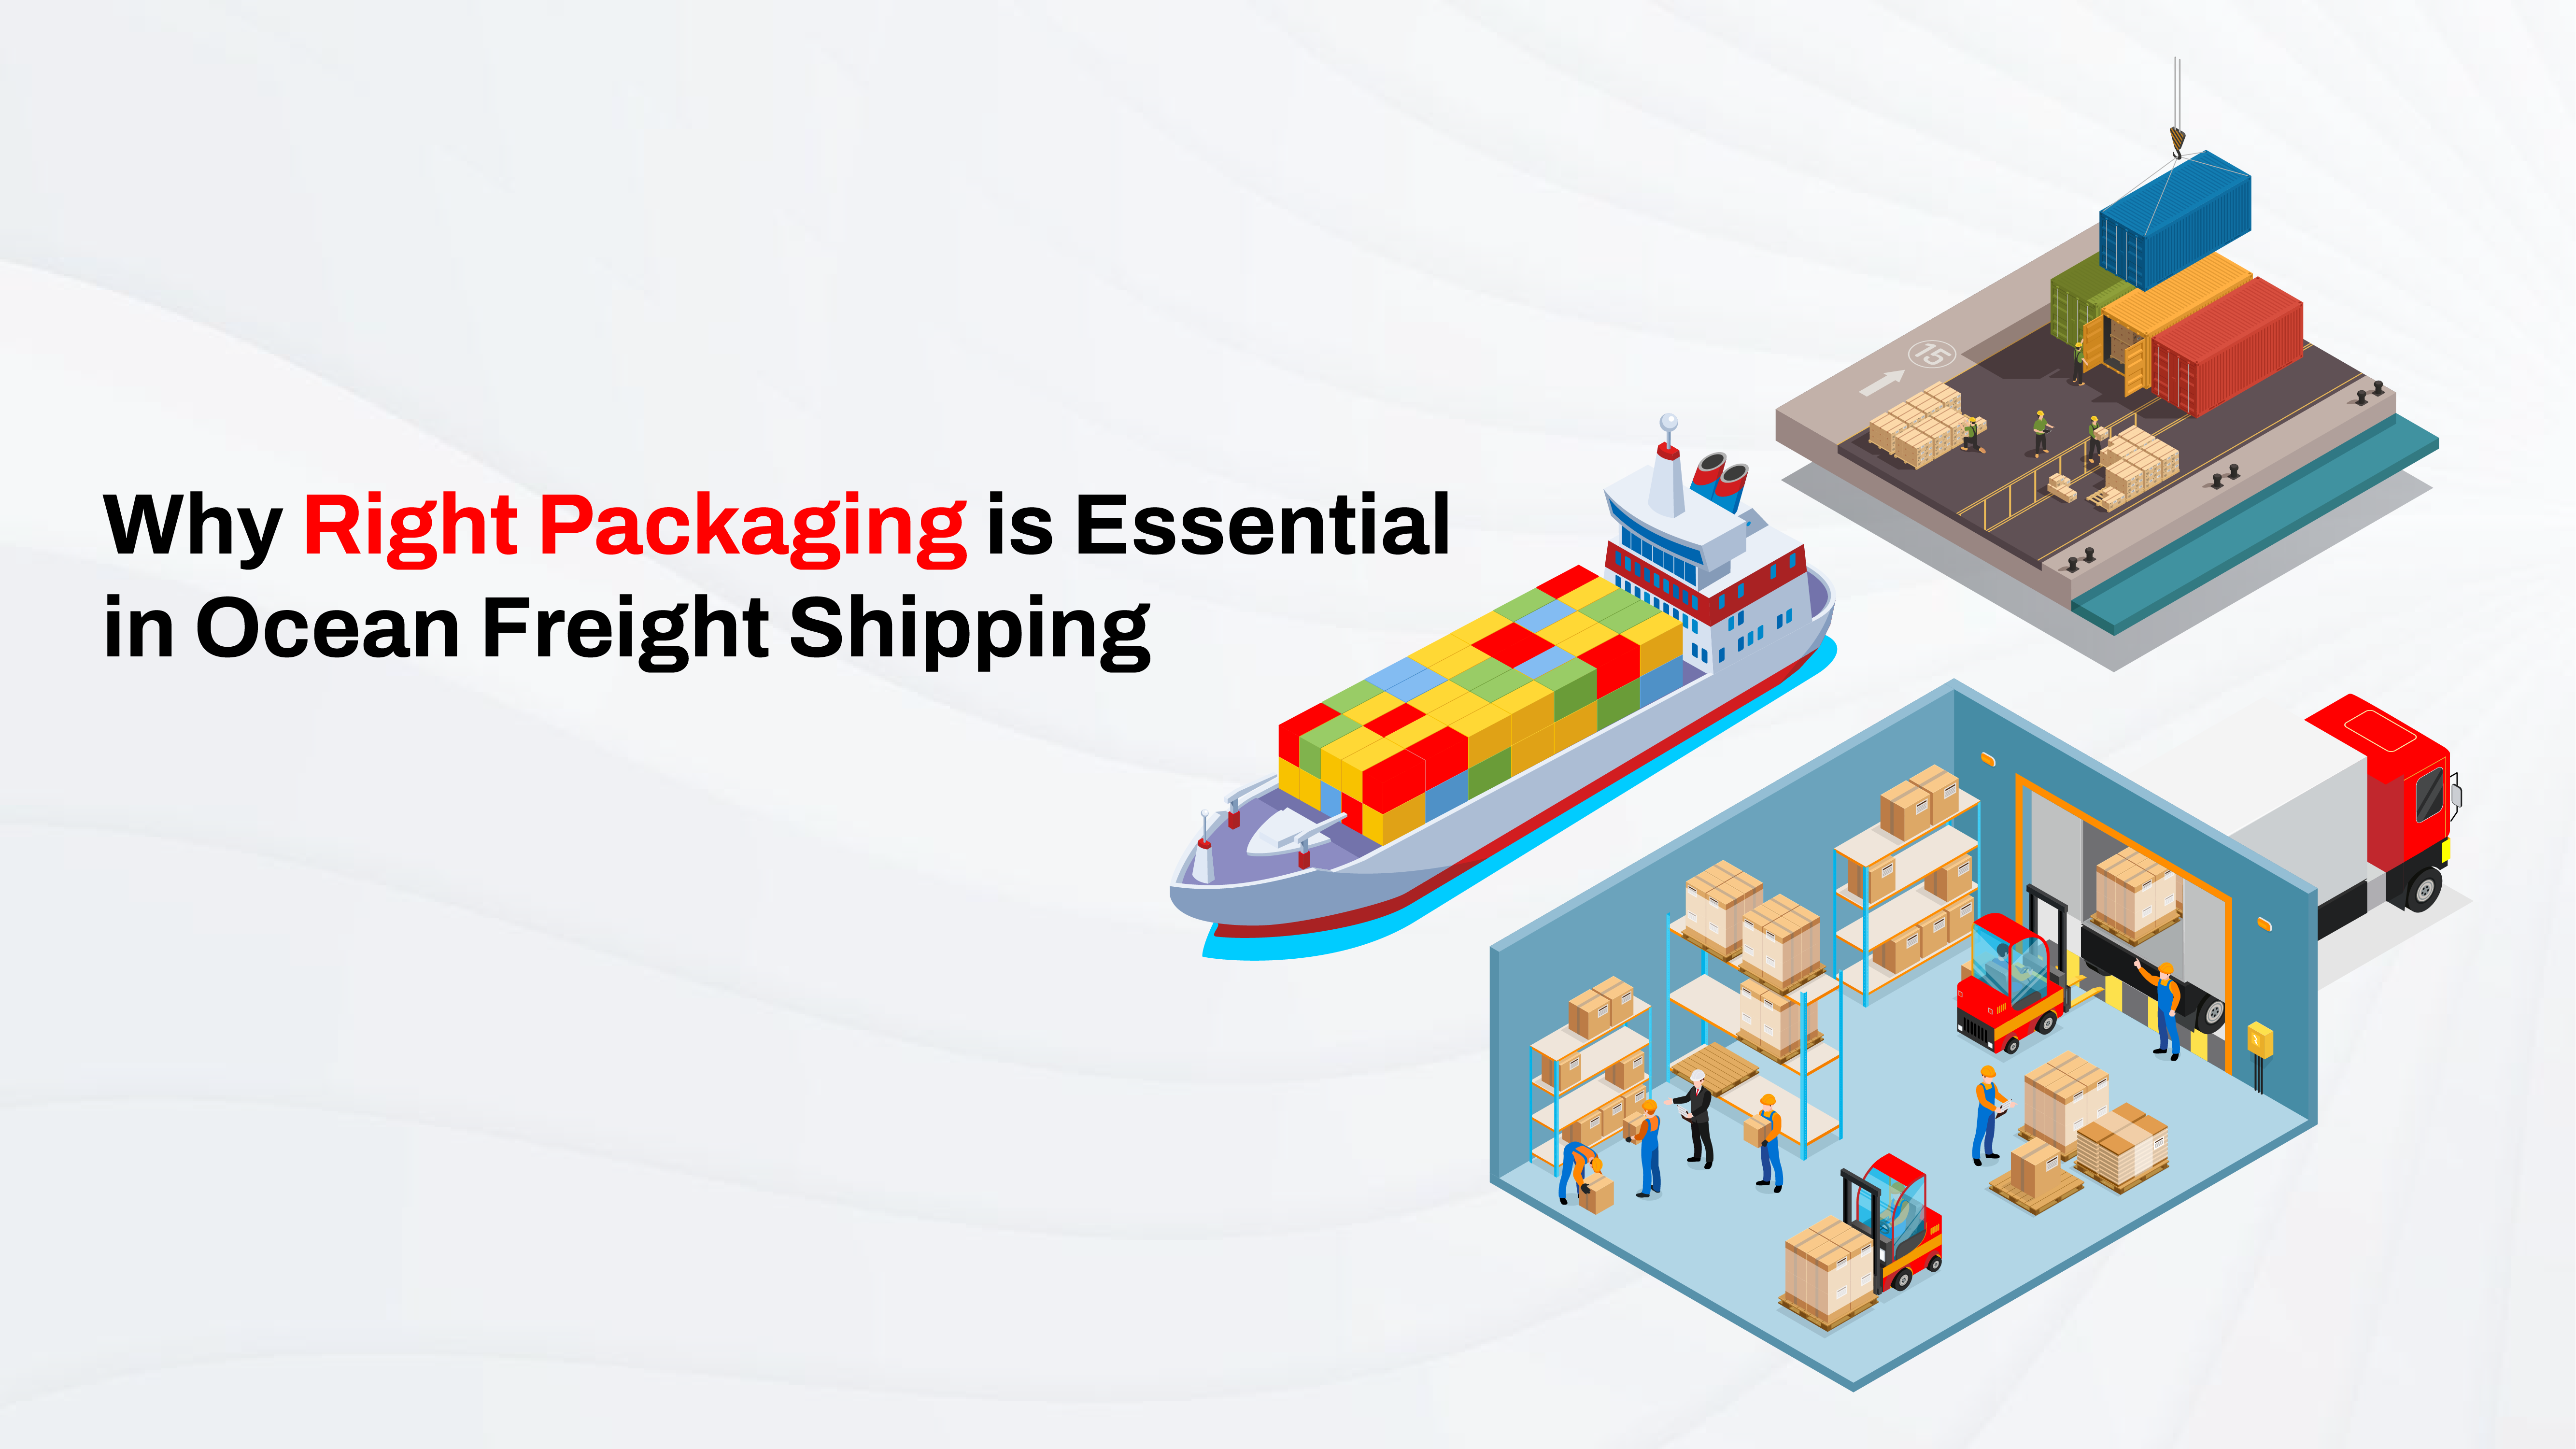 Why Right Packaging is Essential in Ocean Freight Shipping